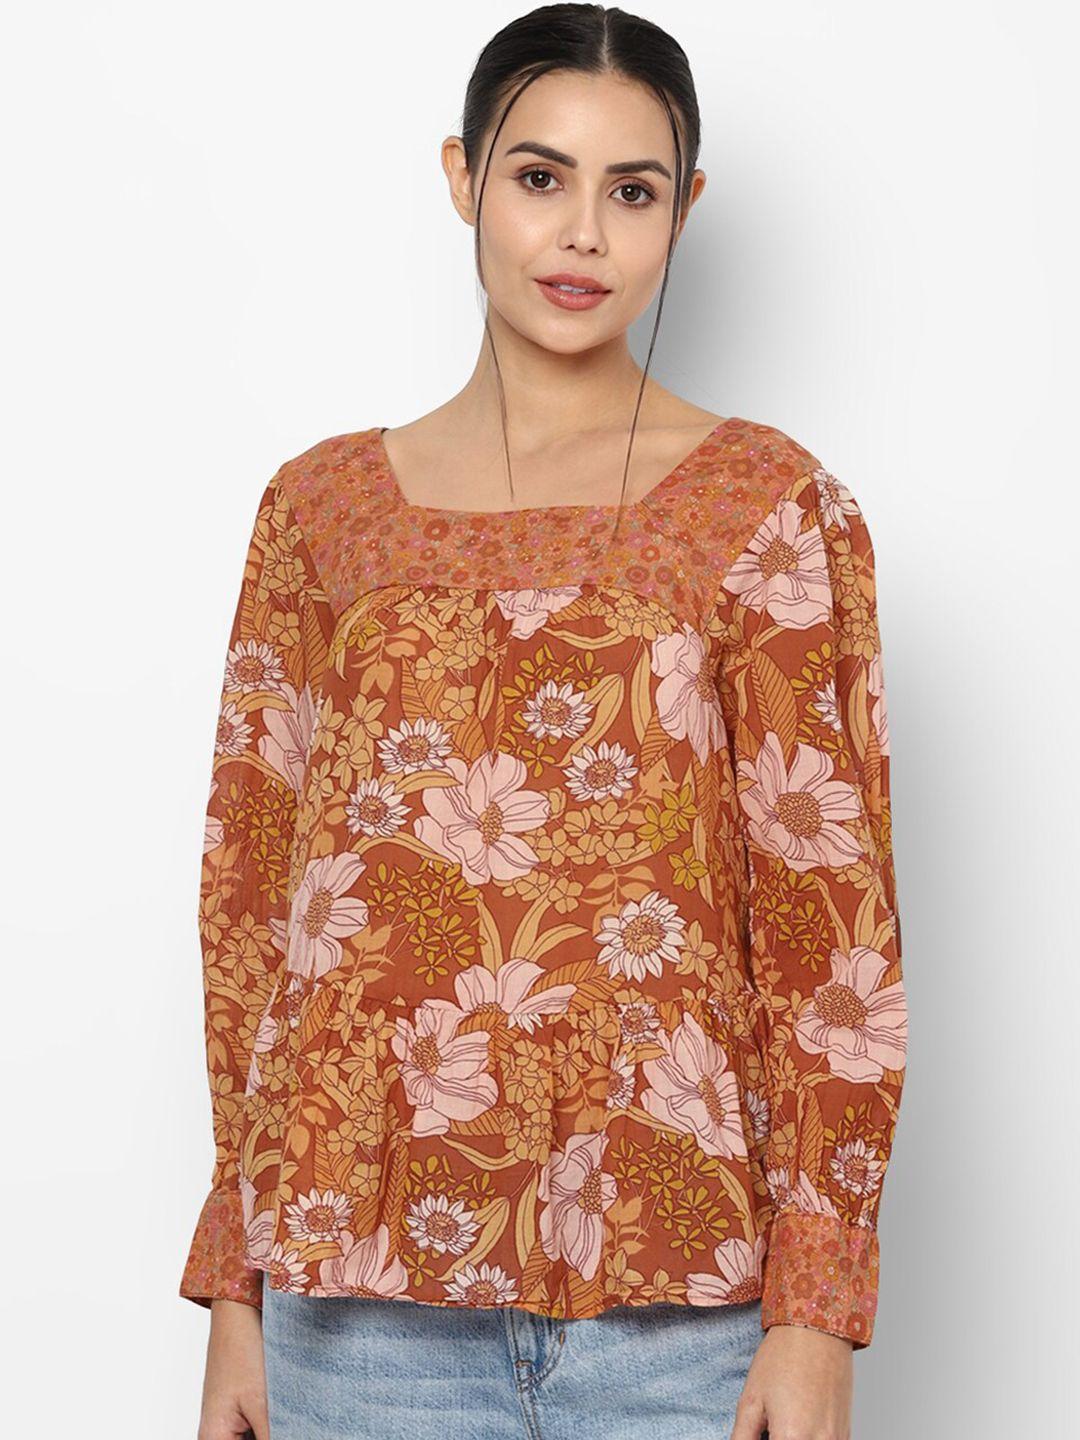 american eagle outfitters orange floral print top